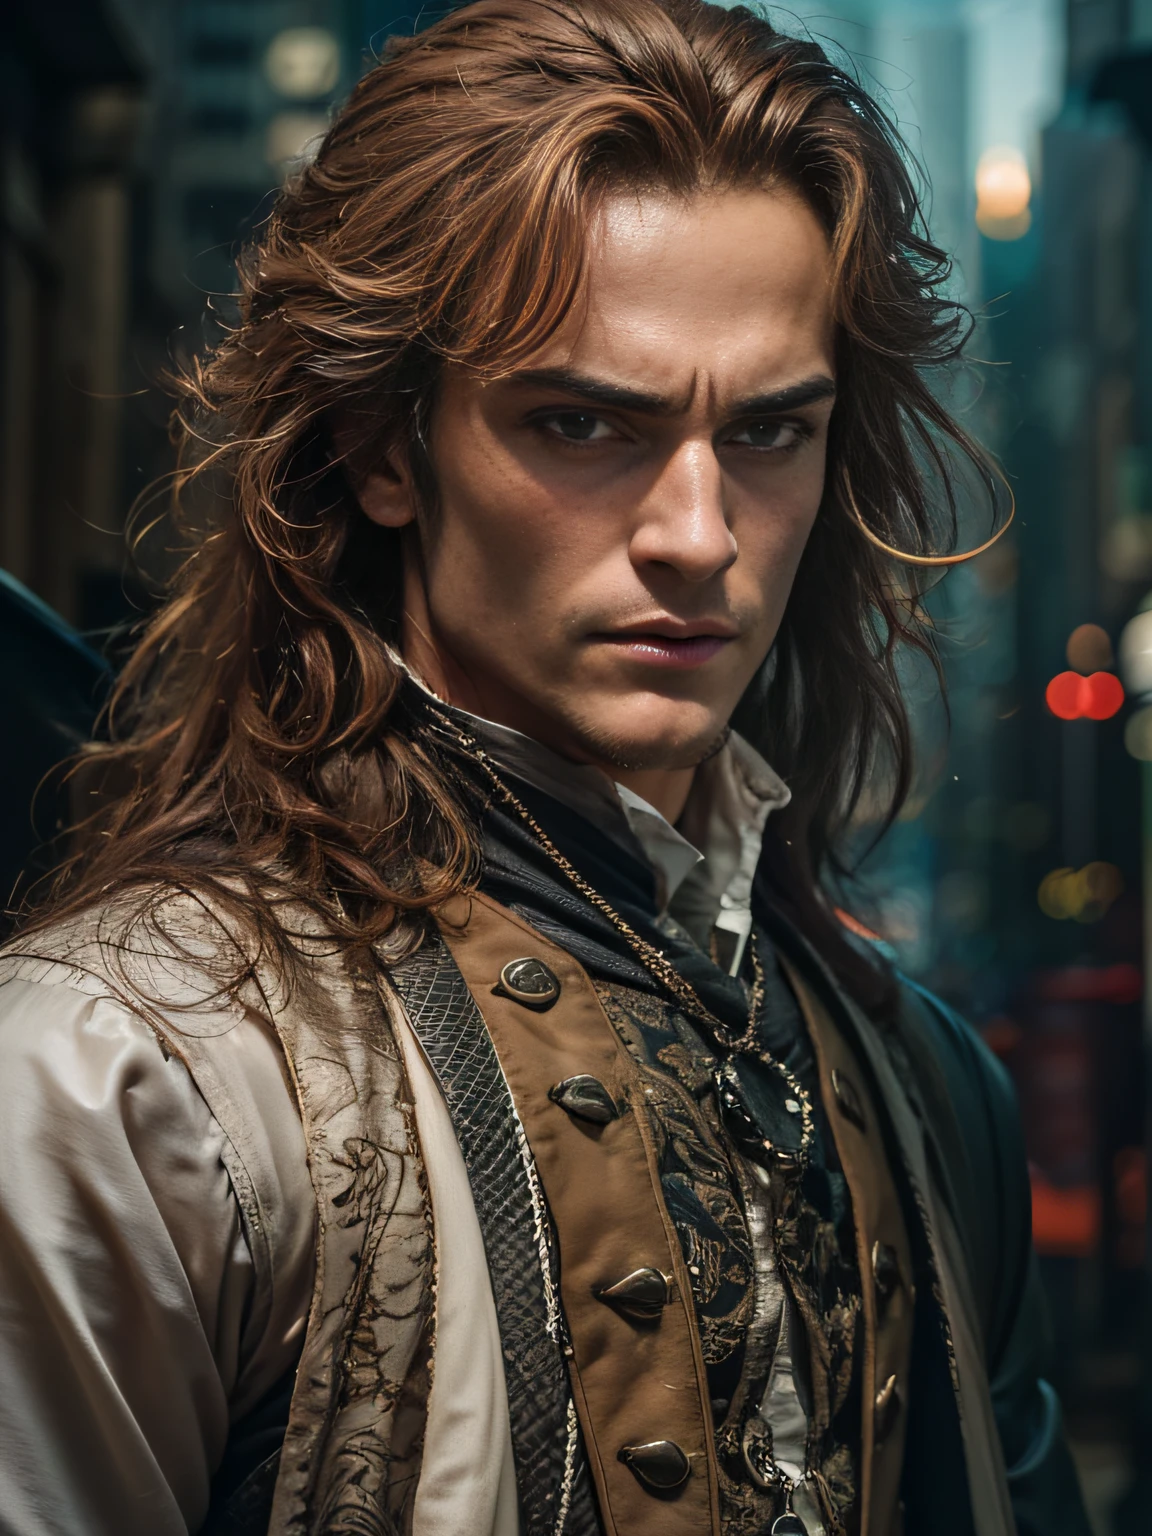 30 year old man，a handsome，against the backdrop of a metropolis, It's dark night, l vampire, hairlong, Serious, hyper realisitc, Stuart Townsend, Vampire Lestat de Lioncourt, From the movie "Queen of the Damned"（A detailed eye：1.3），BazleColor Eye，full bodyesbian